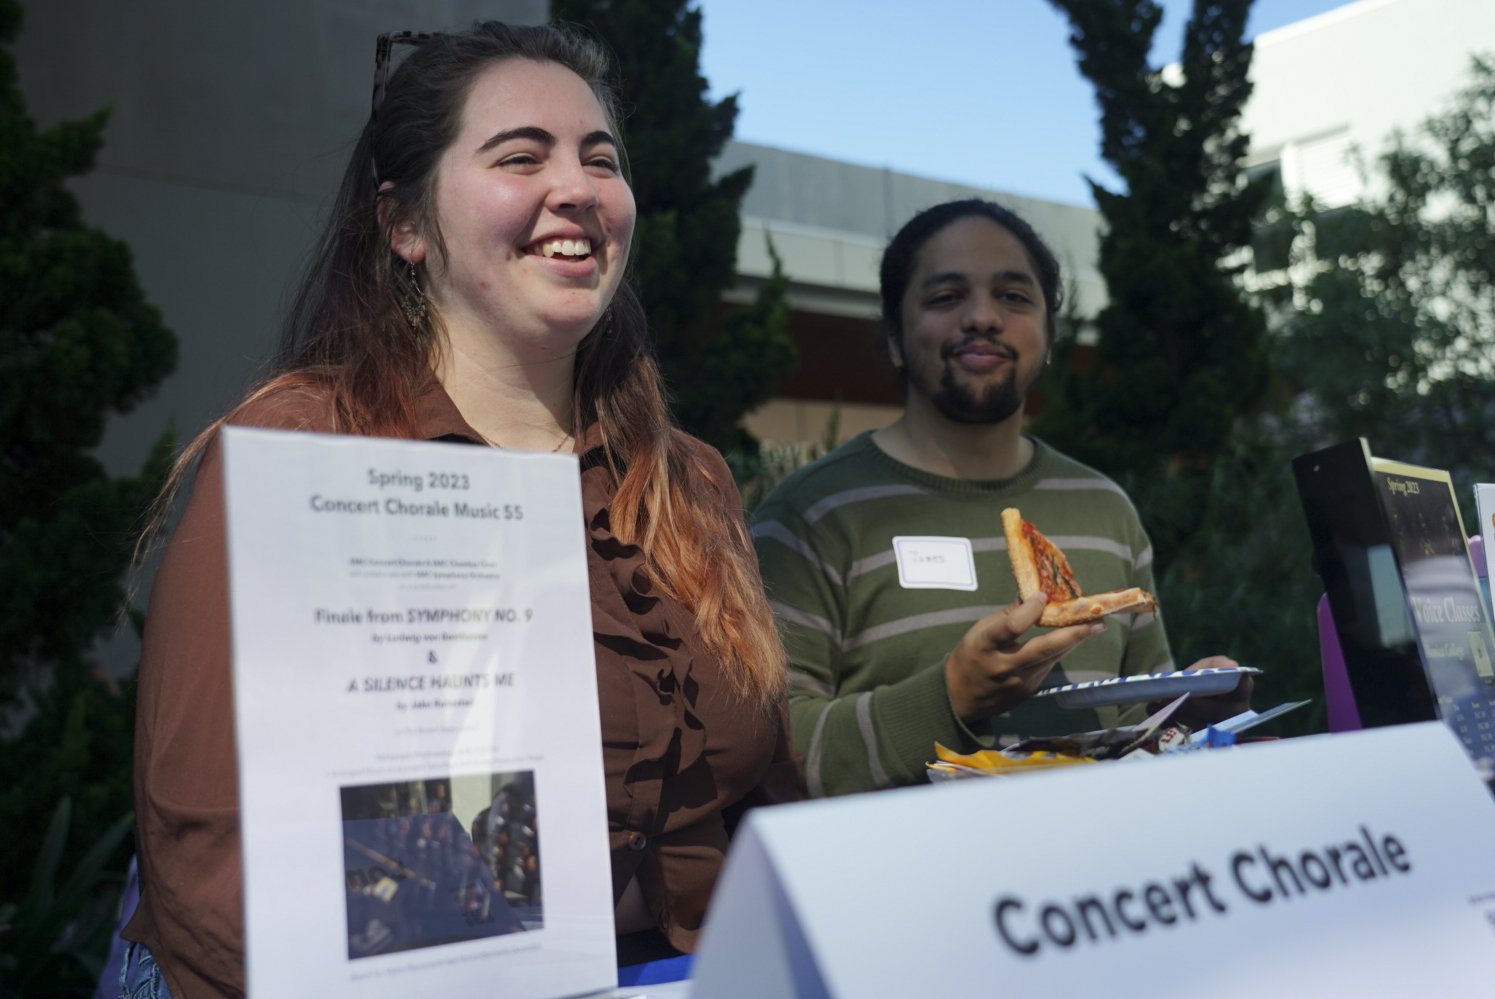  Representatives of Santa Monica College's Concert Chorale present information during an open house hosted by the faculty of the SMC Music Department Tuesday, Nov. 15 2022. 